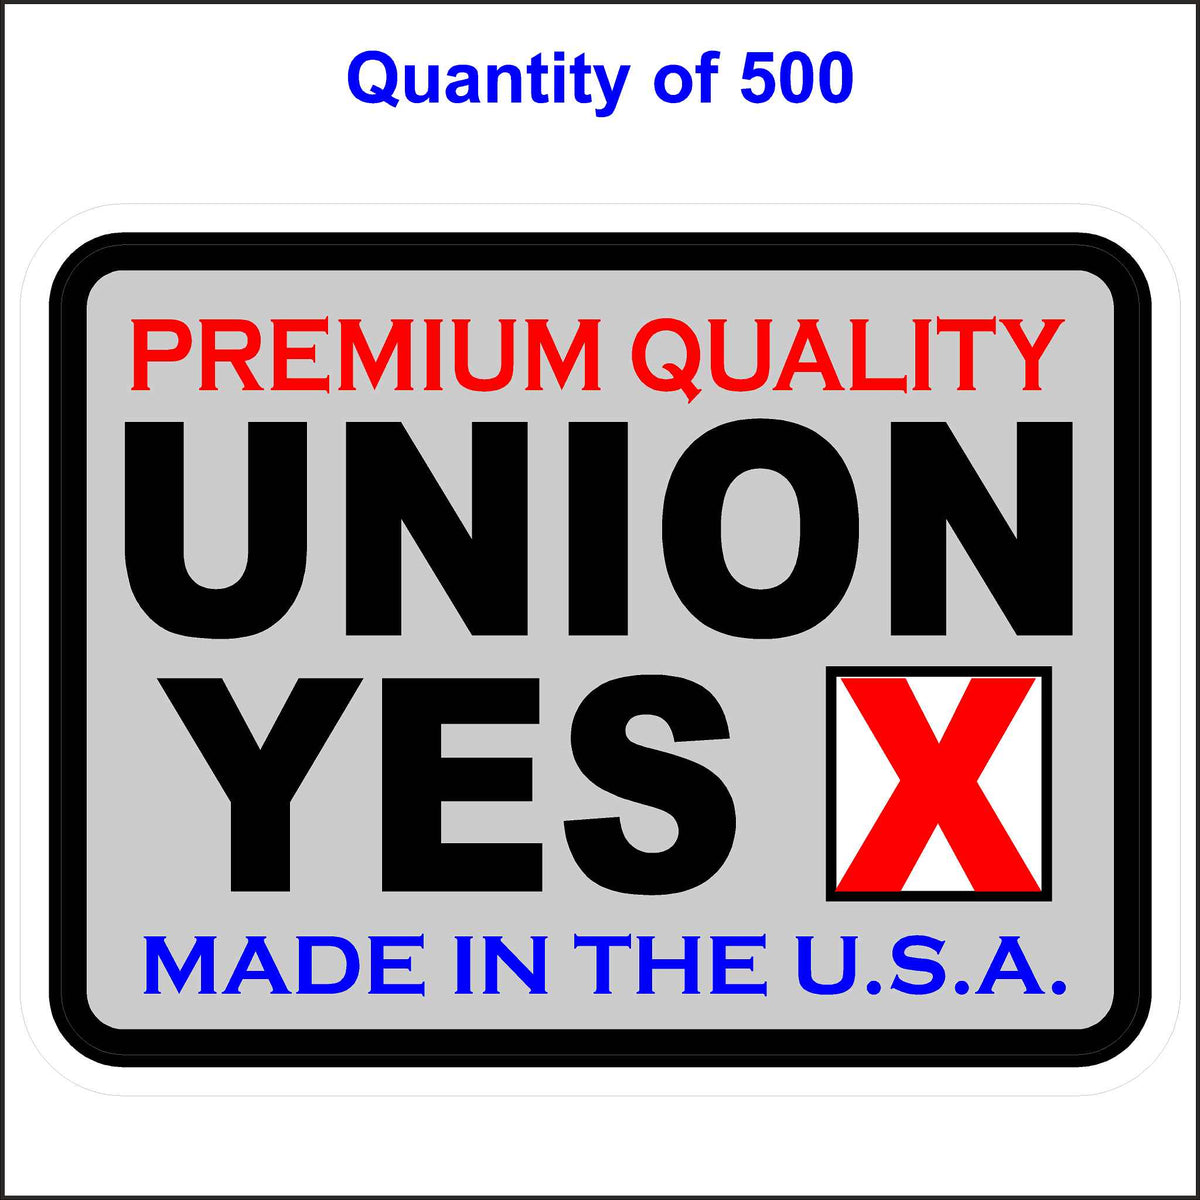 Union Stickers Made in the USA Premium Quality Union Yes. 500 Quantity.